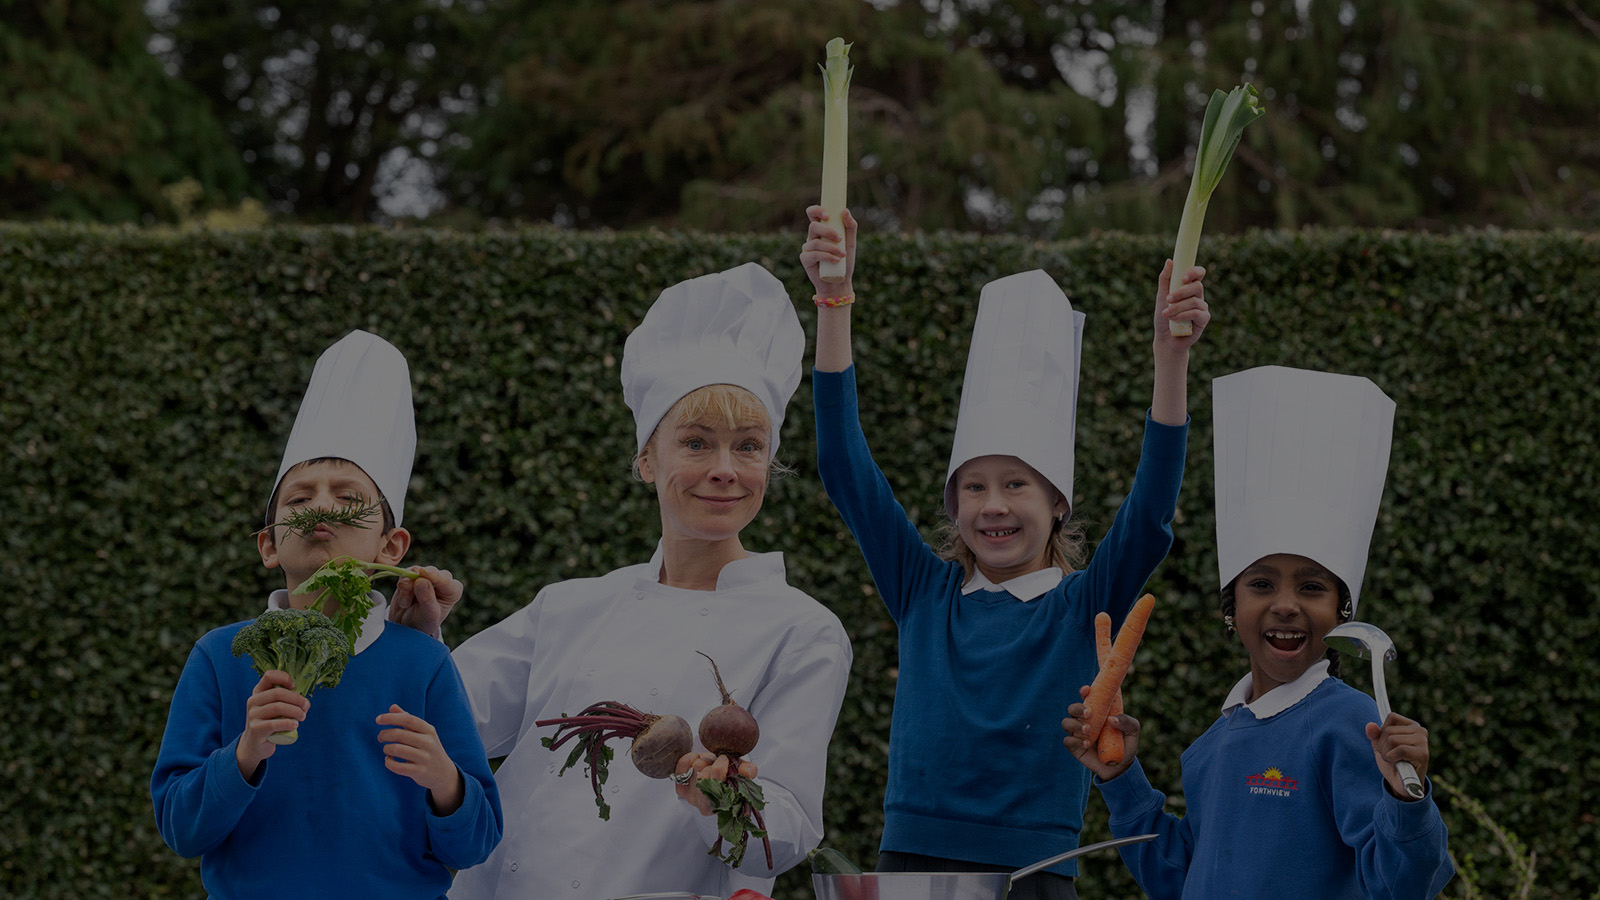 A woman with blonde hair wearing a traditional white chef's outfit and hat and three young children in bright blue jumpers hold up various vegetables